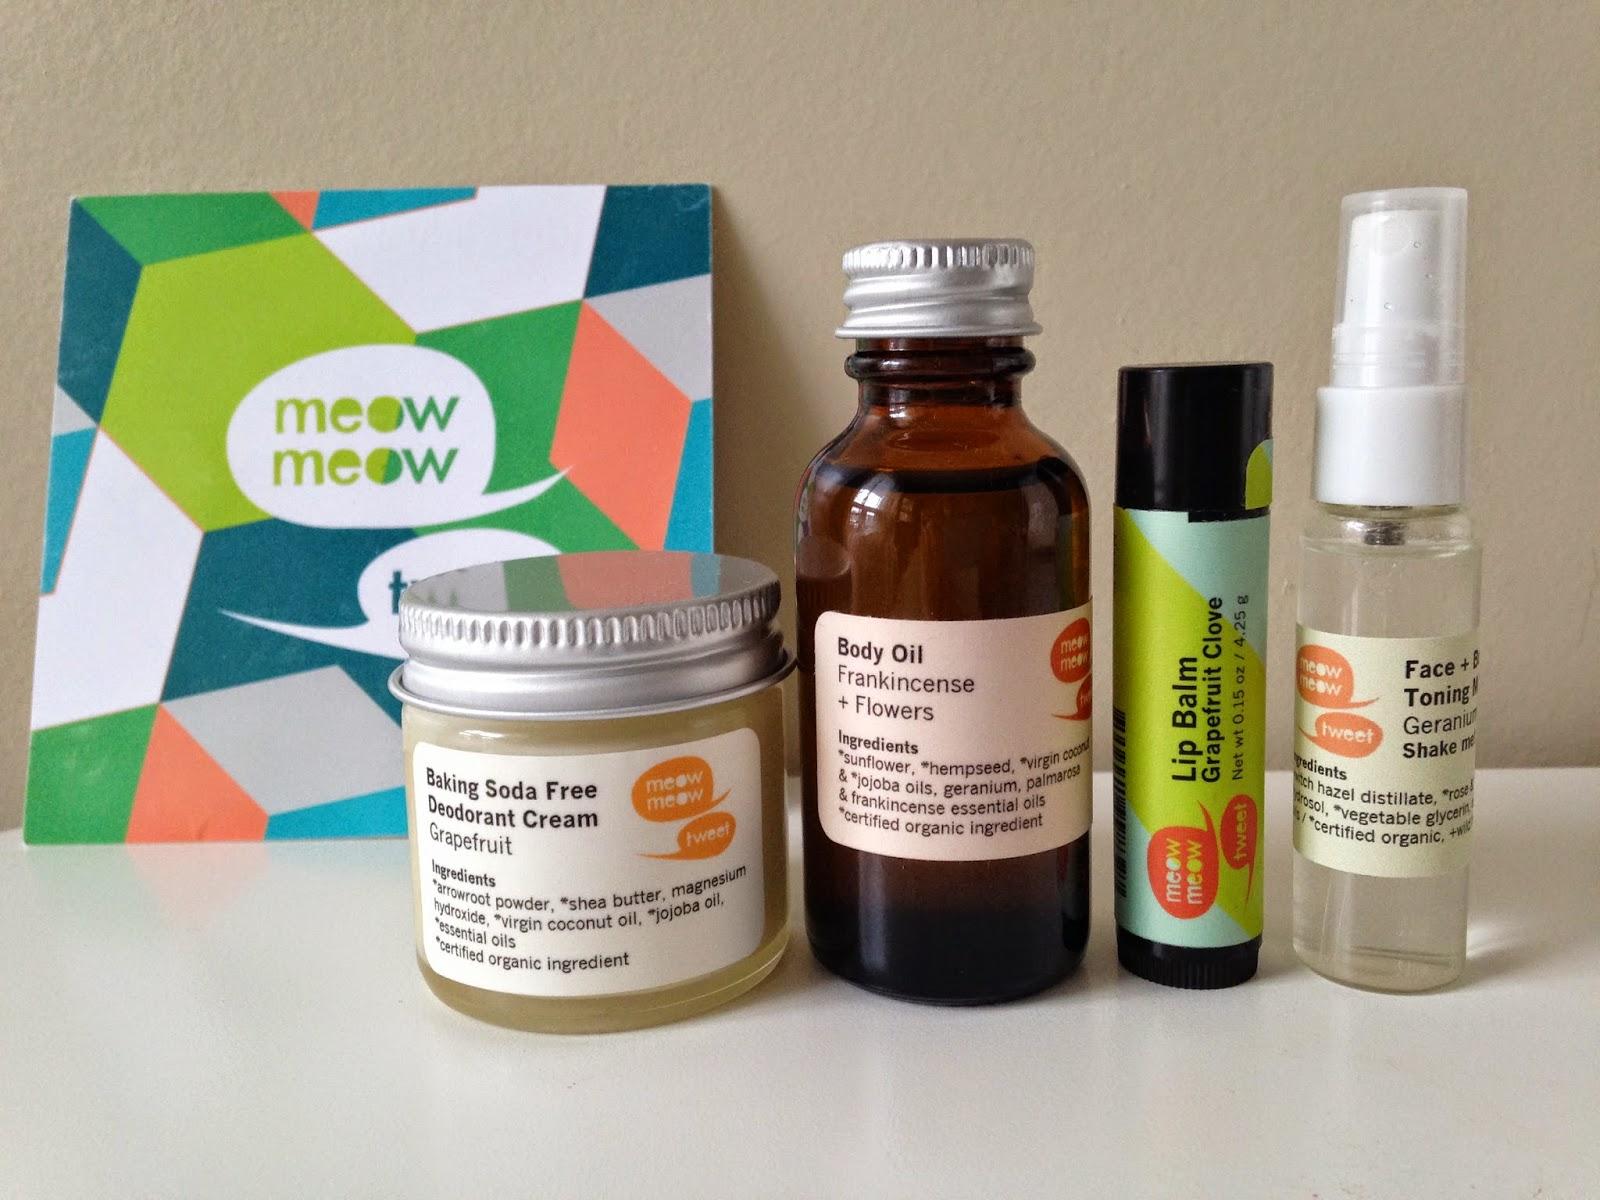 Here he is! The Meow Meow tweet deodorant free of Baking Soda :)